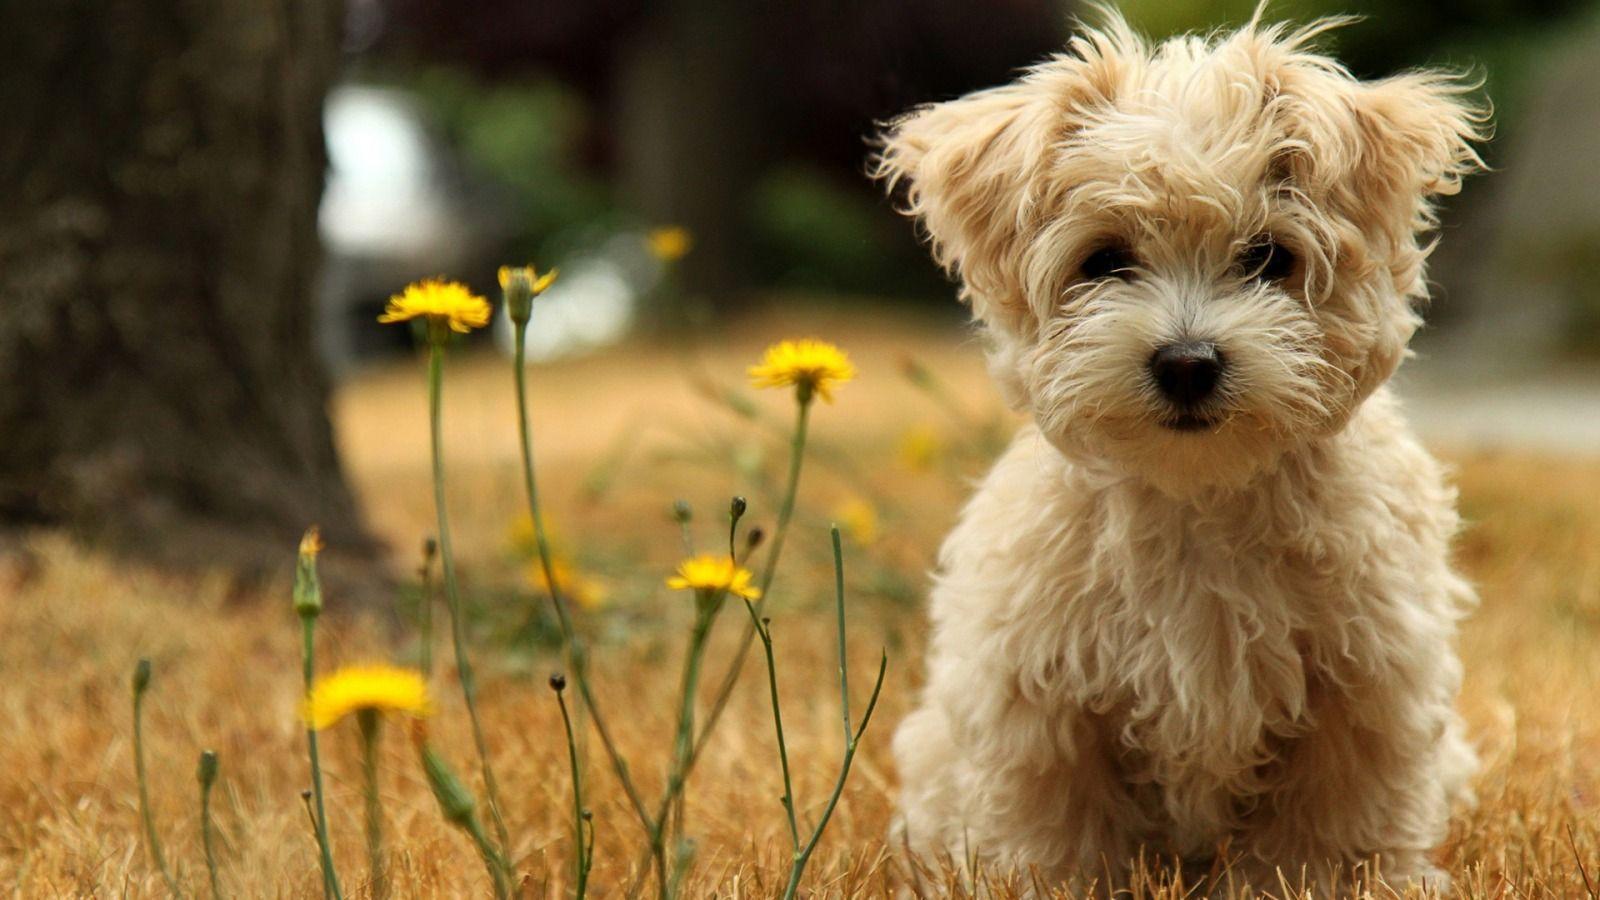 Cutest puppy ever! Perfect for any dog board. Cute puppies